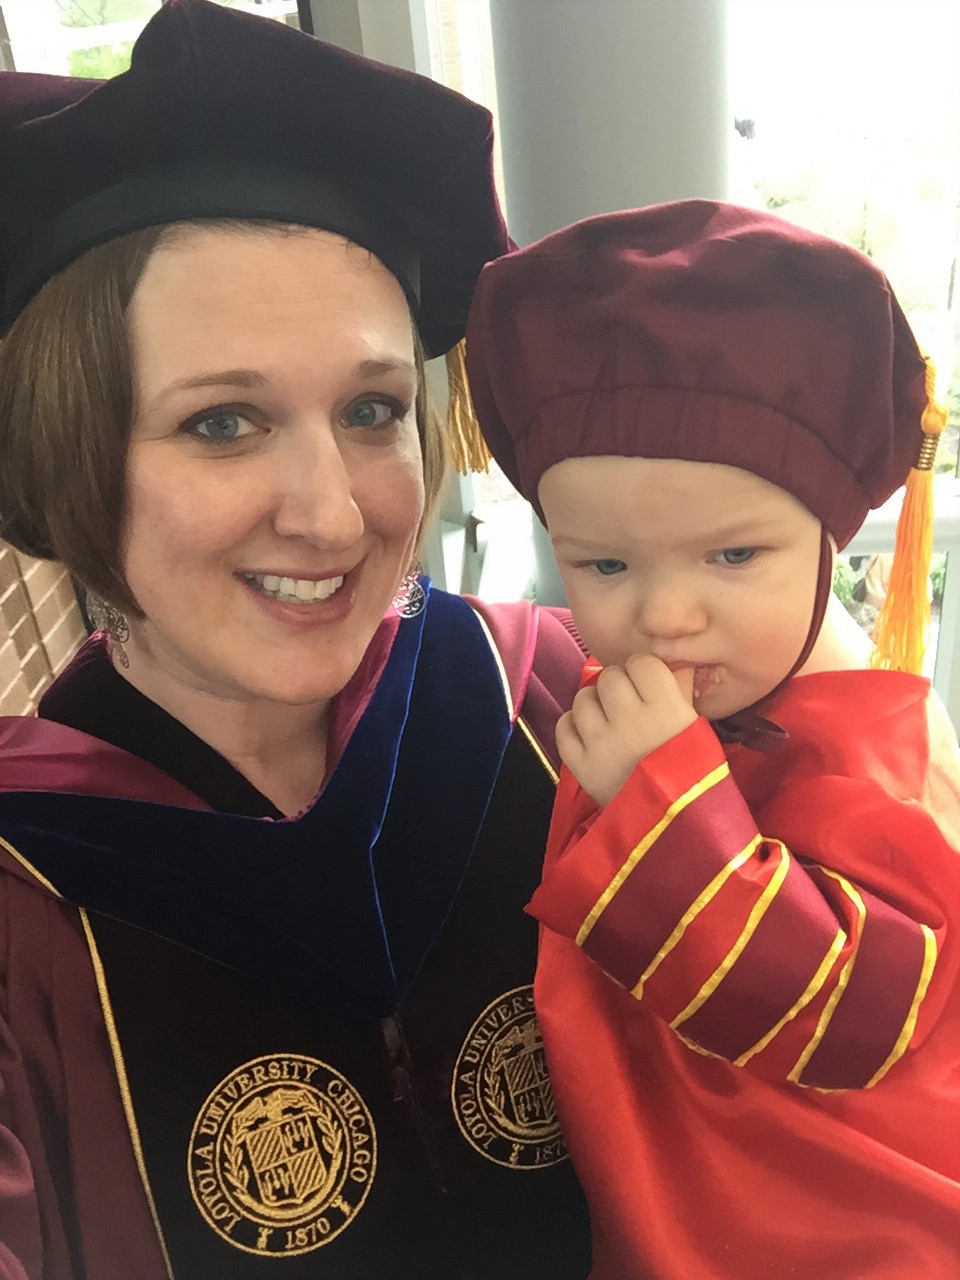 A photo of PhD graduate Merrit Rehn-DeBraal on graduation day, holding her daughter Mila, who is also wearing a PhD graduation cap.